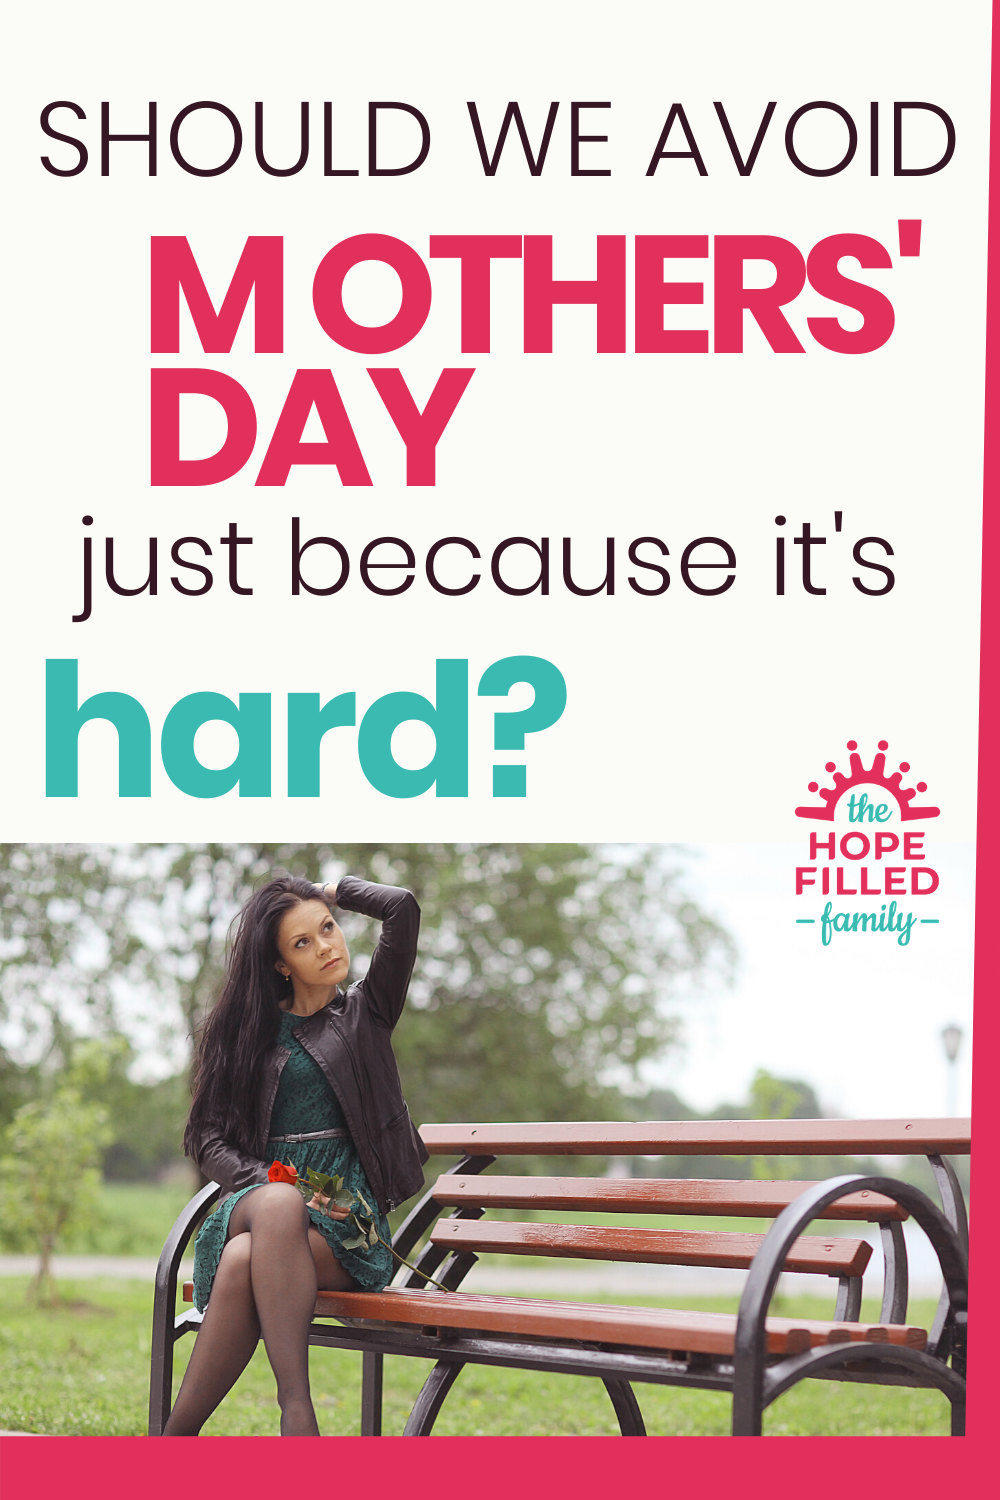 Should we abandon Mothers' Day because of all the hard feelings? Or is there another way we can approach this day, so difficult for many?